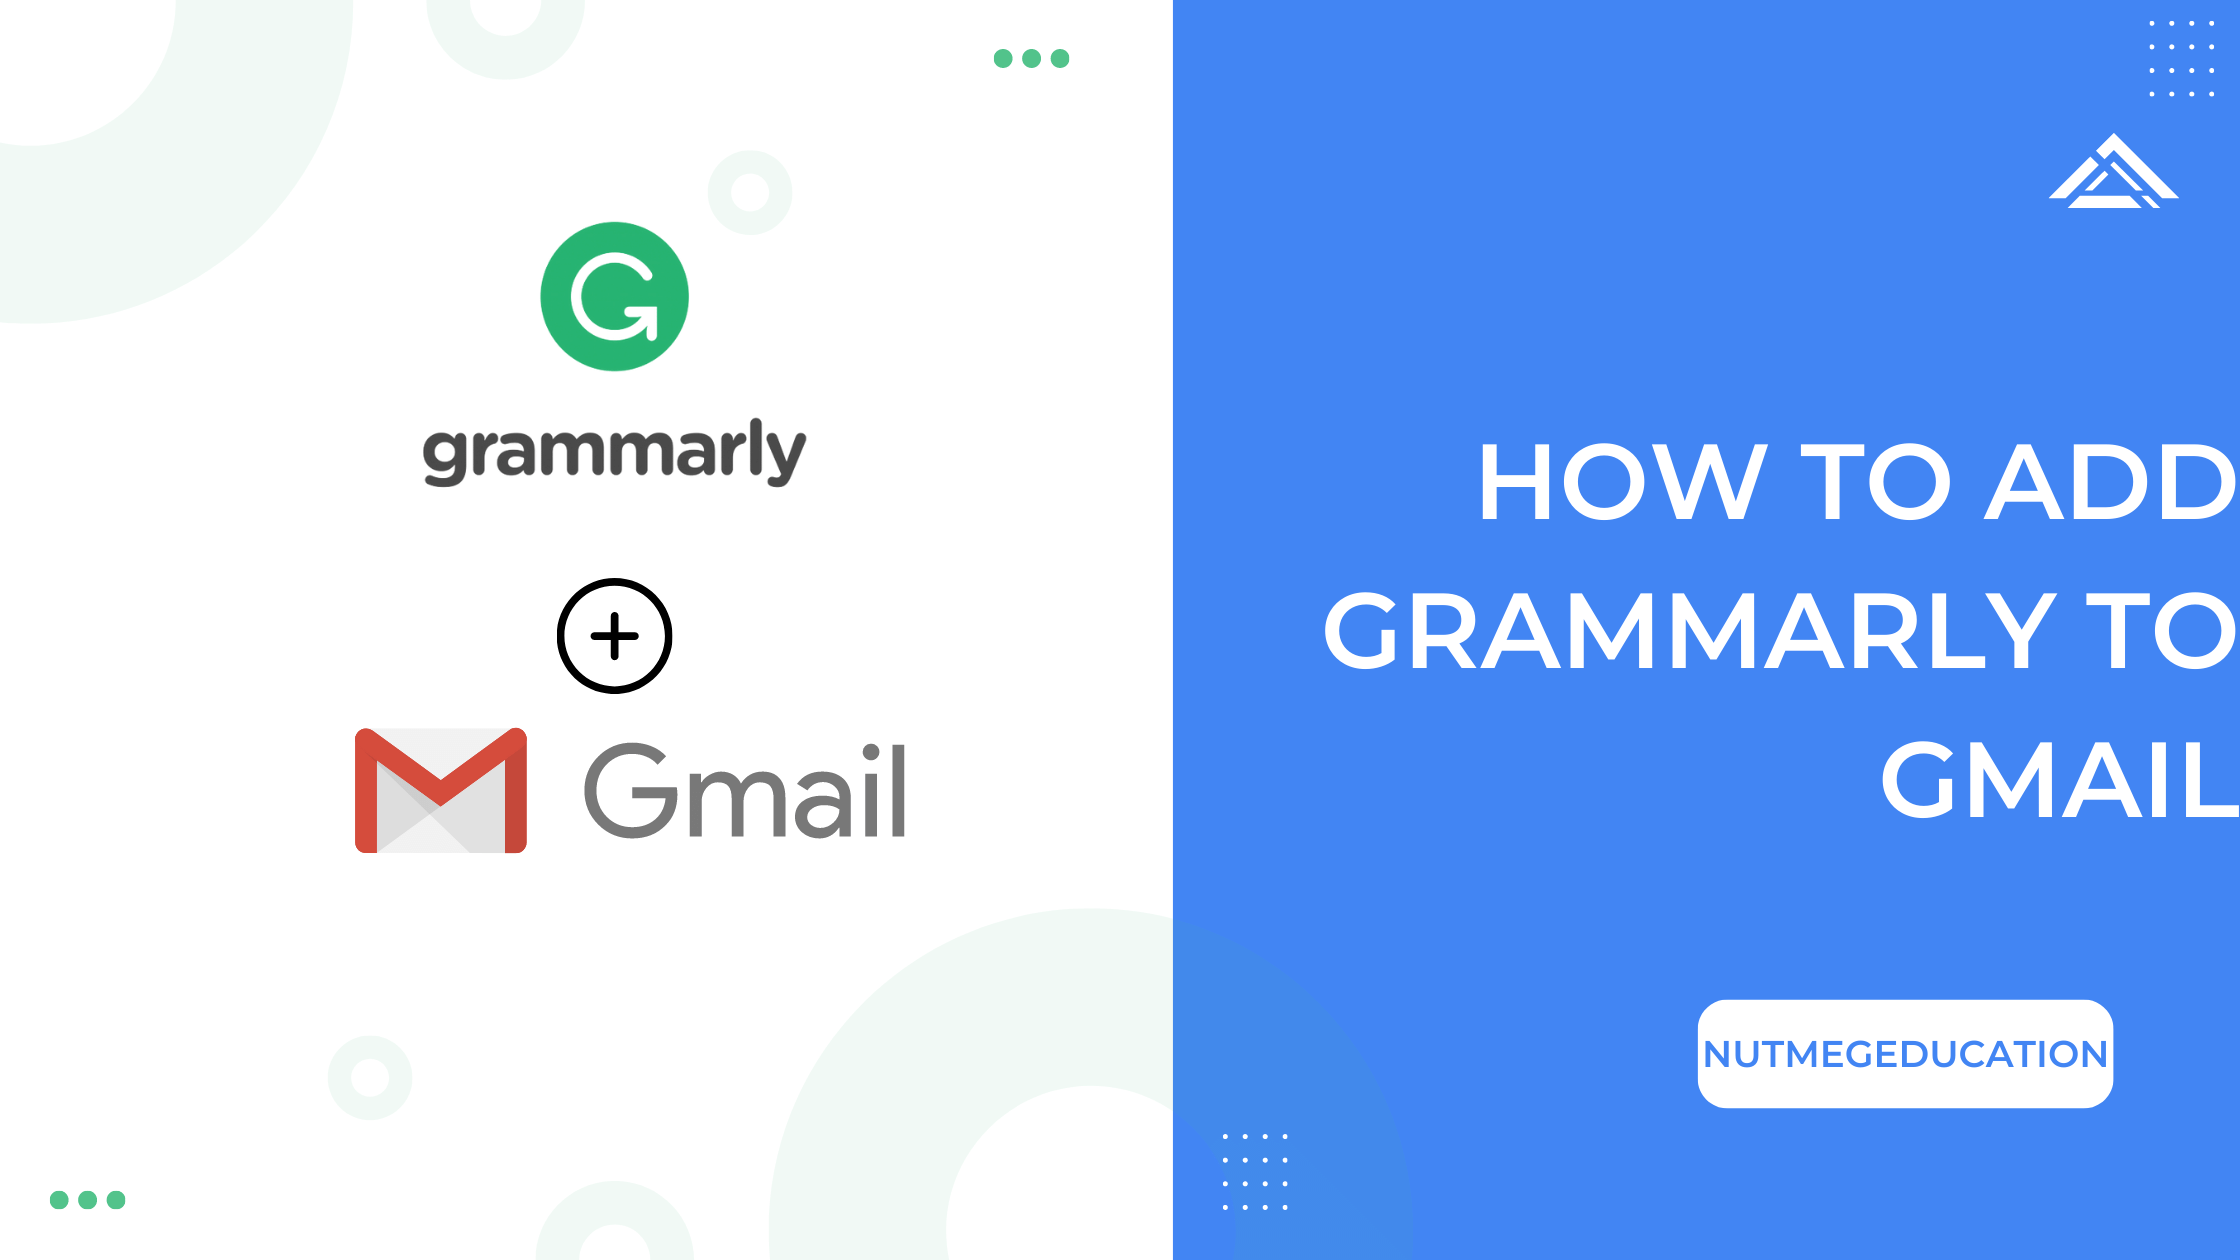 How To Add Grammarly To Gmail - NutMegEducation